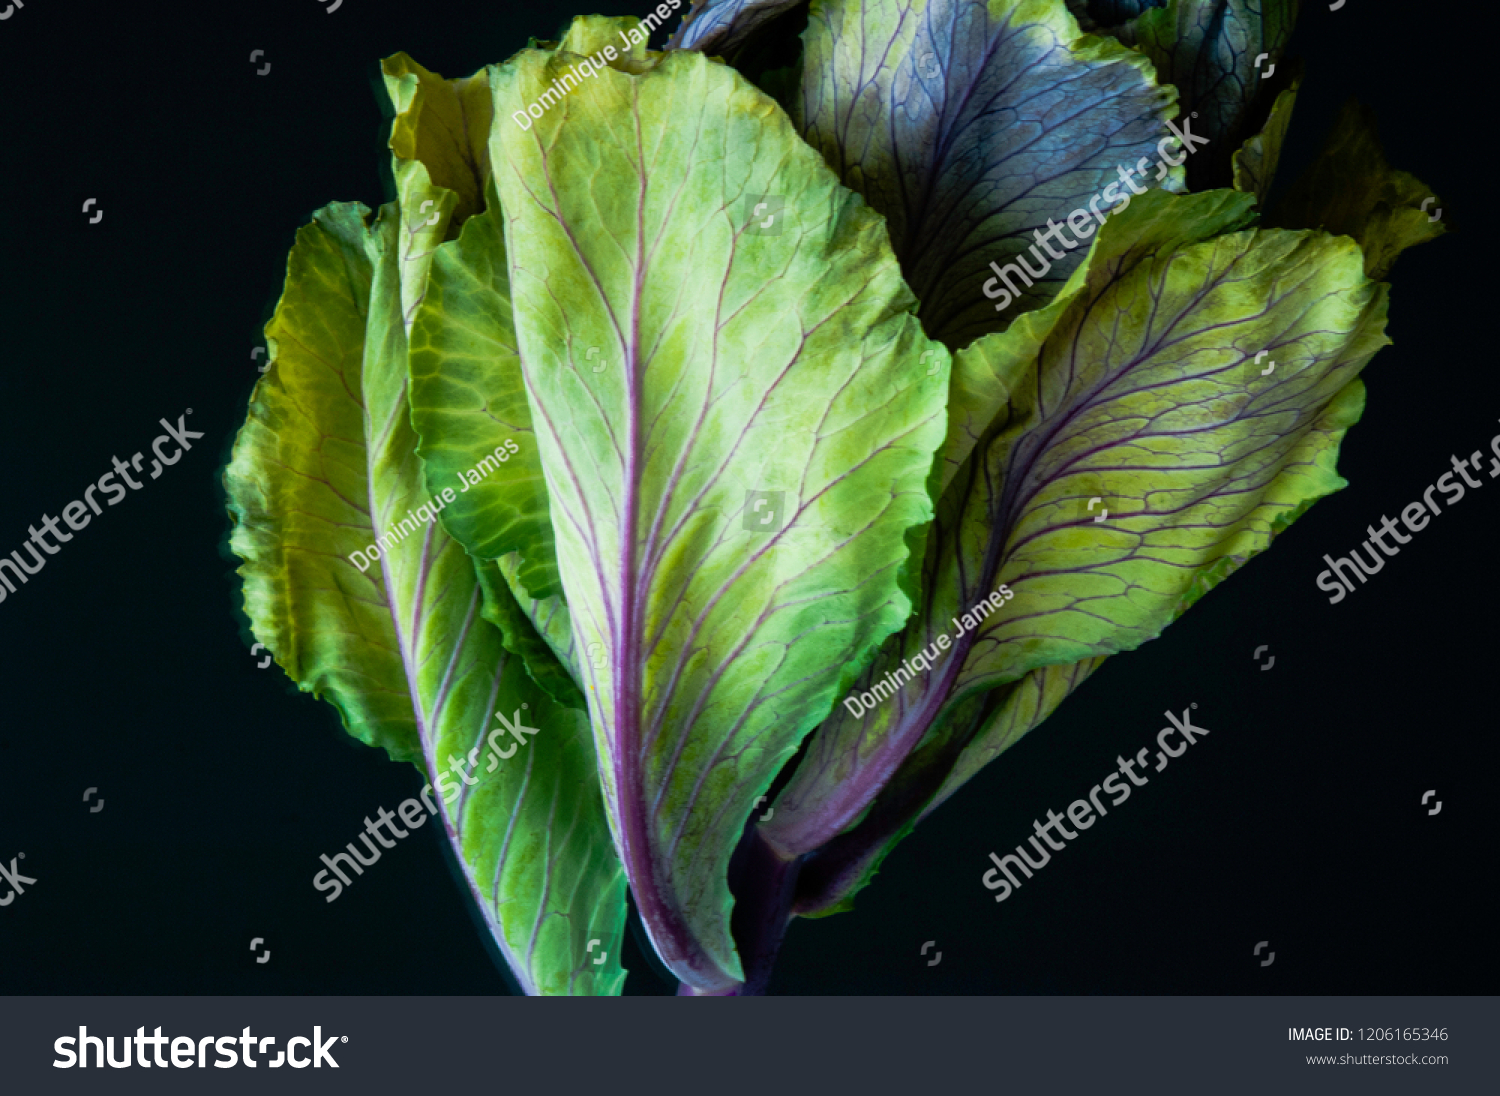 An ornamental cabbage or ornamental kale plant with green and purple leaves in close-up or set against a plain black or dark background. #1206165346